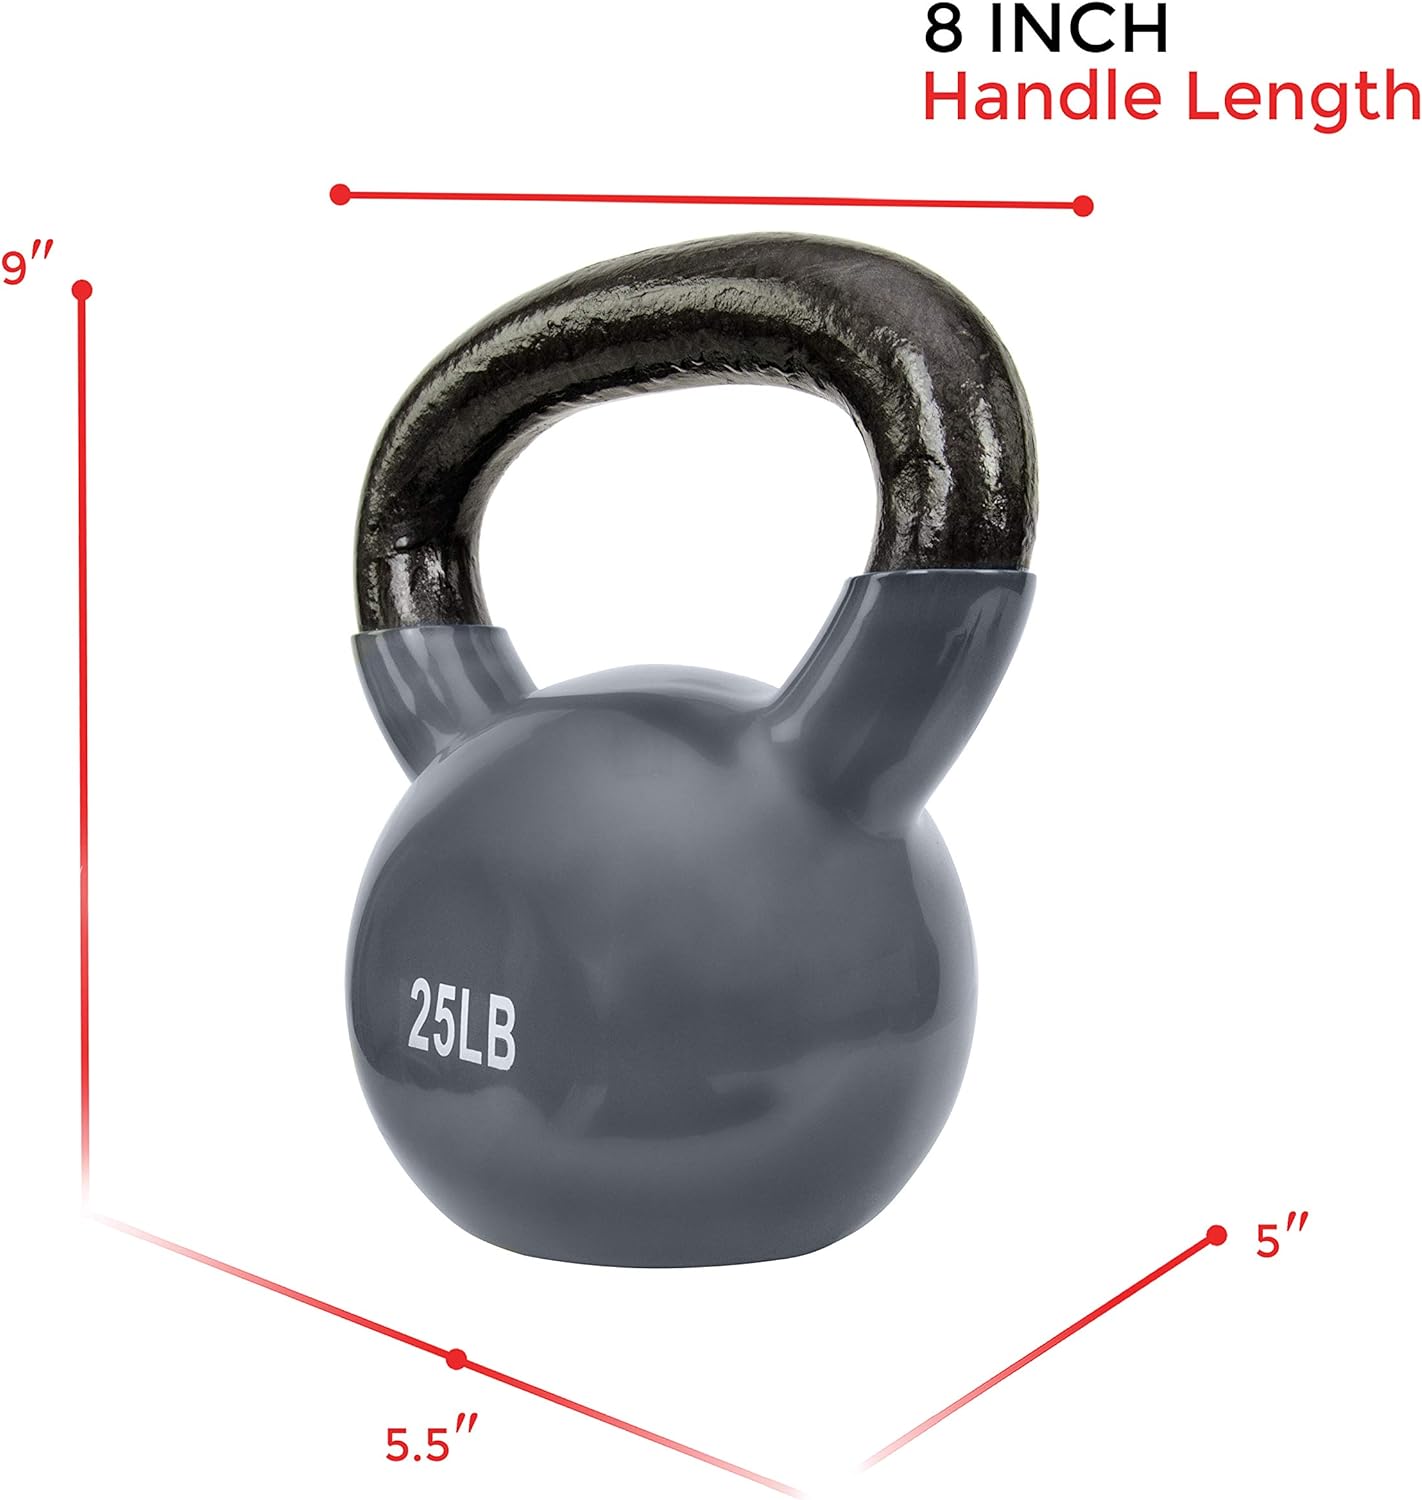 Sunny Health & Fitness Vinyl Coated Kettlebell for Strength Weight Training Available in 5LB, 10LB, 15LB, 20LB, 25LB